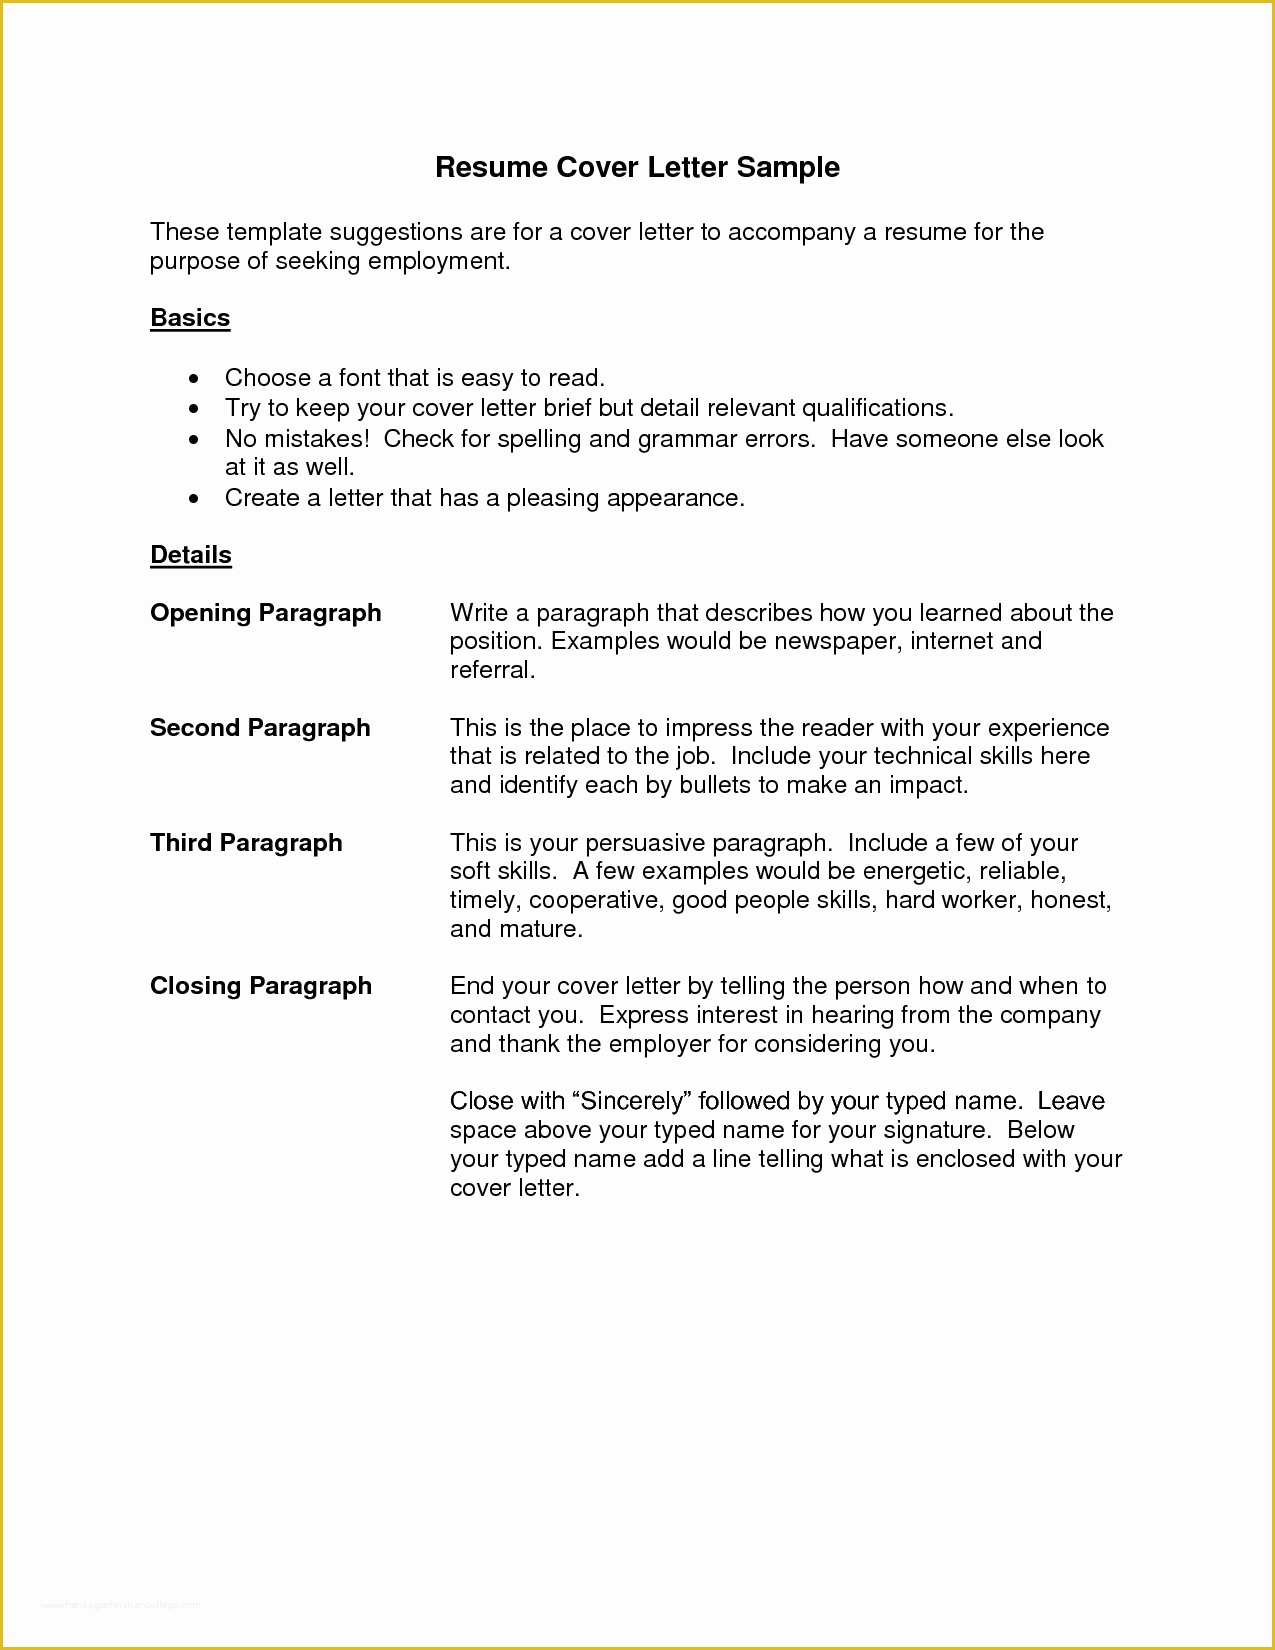 Free Resume Cover Letter Template Of Cover Letter Resume Best Templatesimple Cover Letter